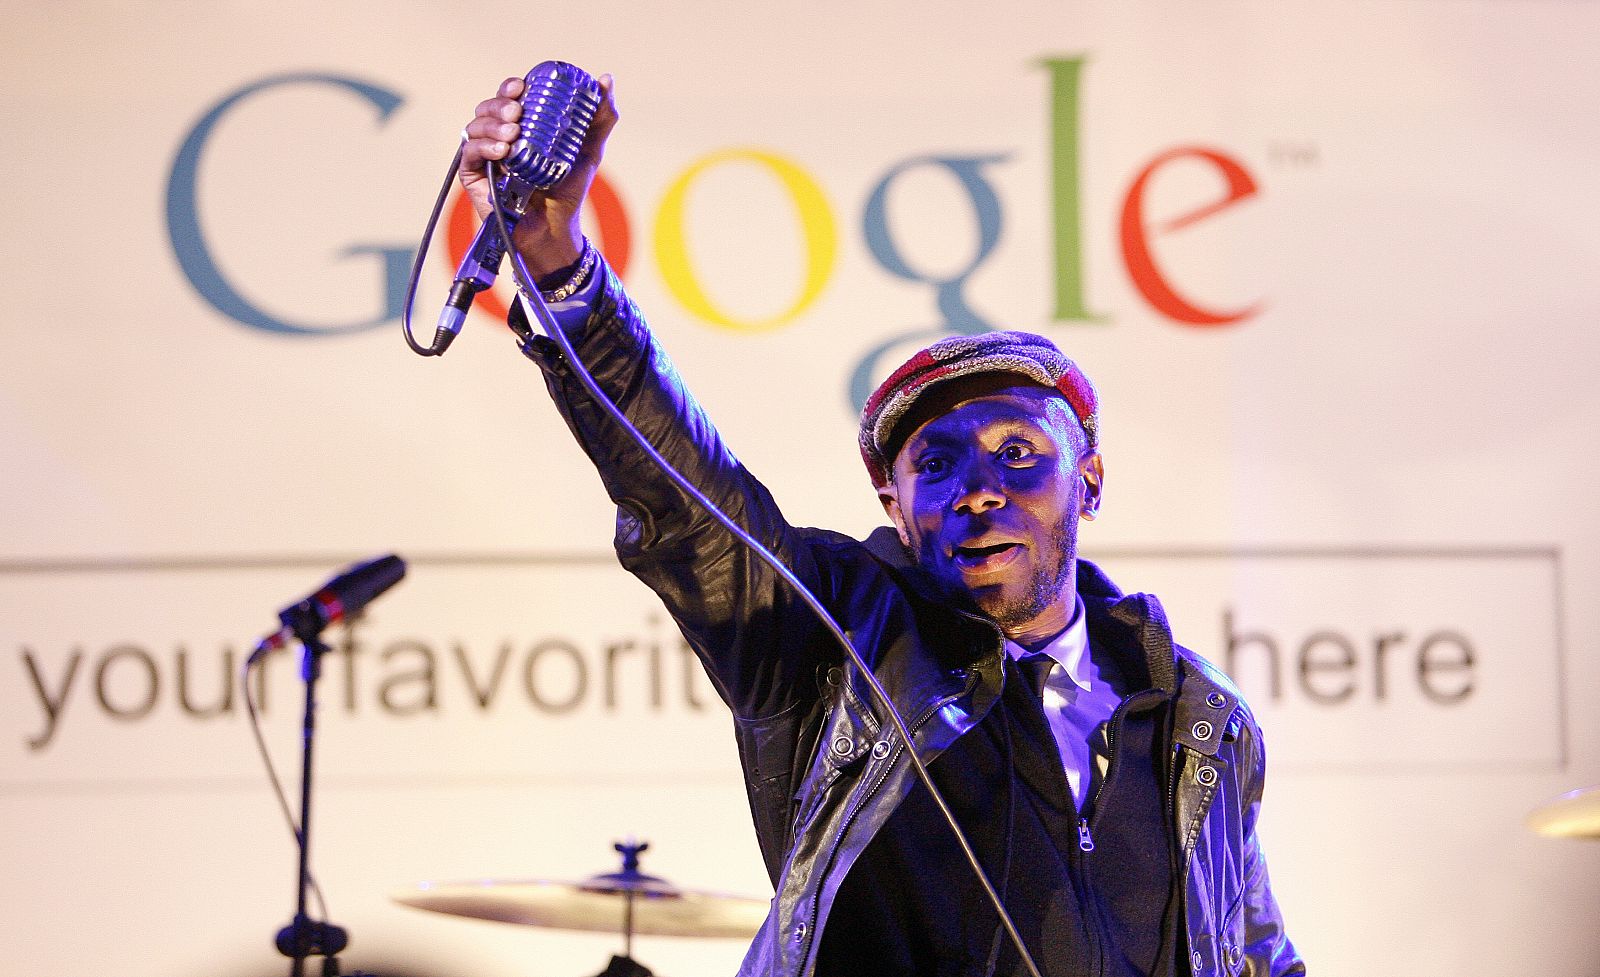 Mos Def performs during the "Discover Music!" event at Capitol Studios in Hollywood